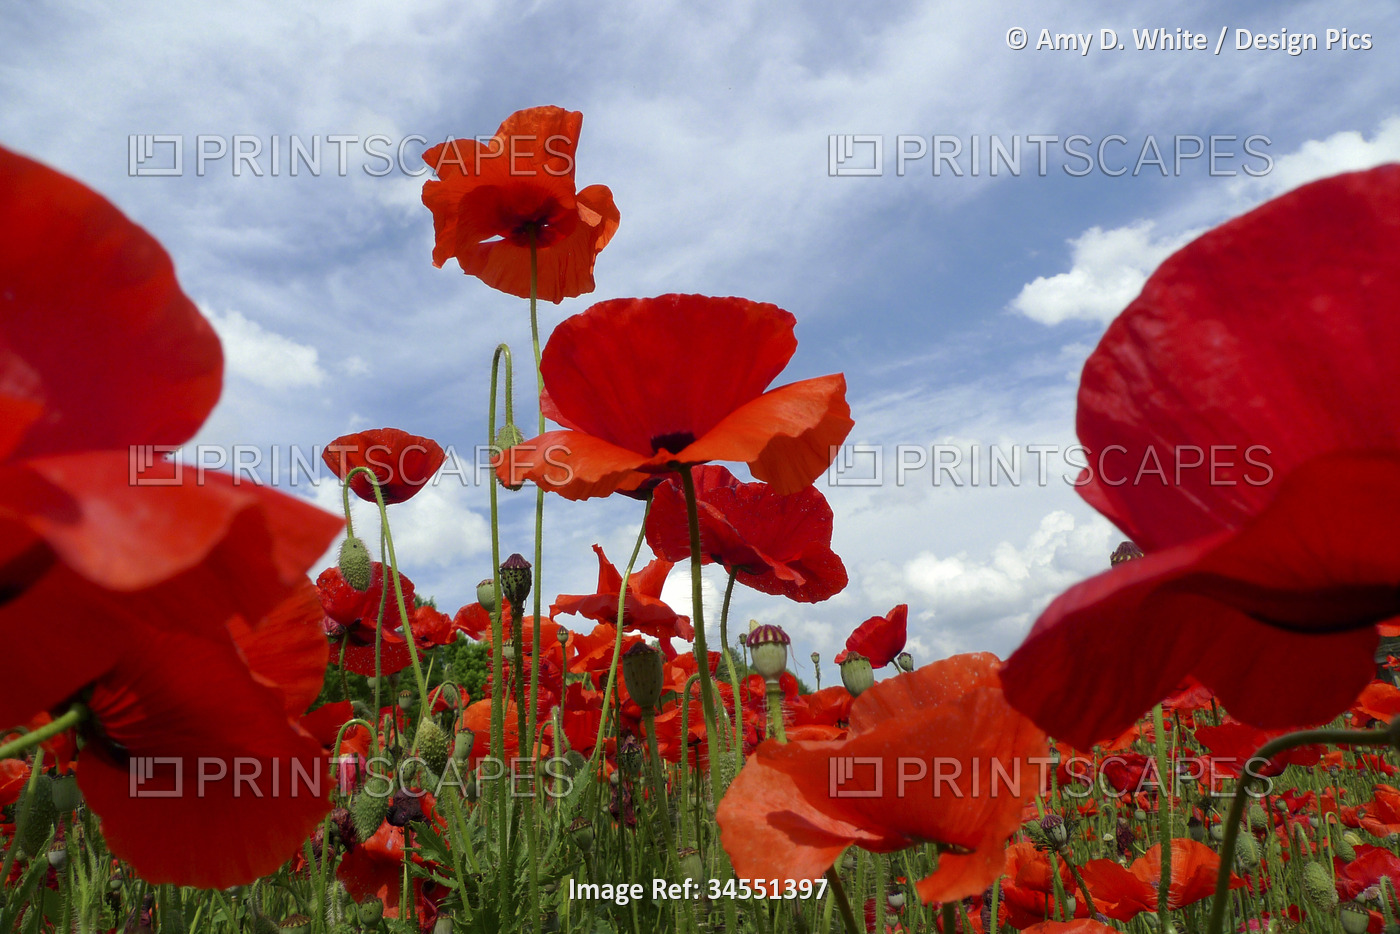 Vibrant red poppies in a field